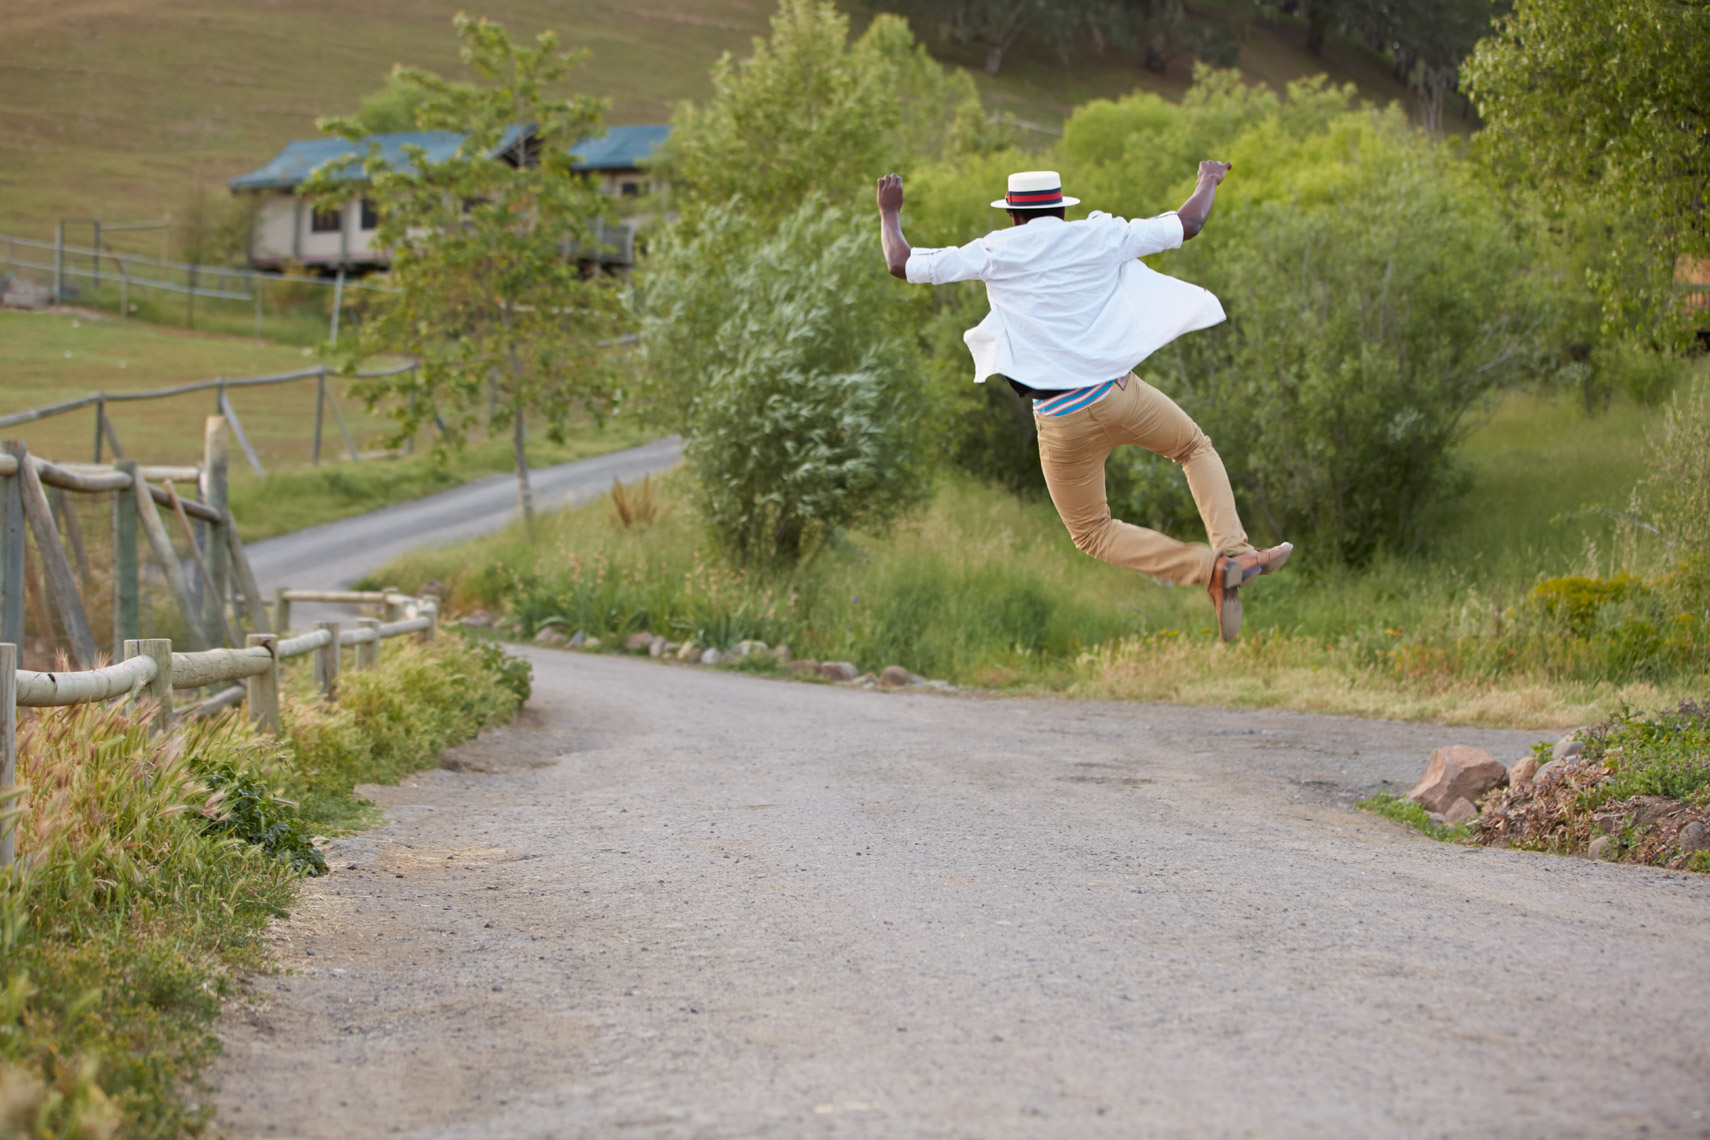 Man in white shirt jumps and clicks his heals together on a country road San Francisco lifestyle photographer